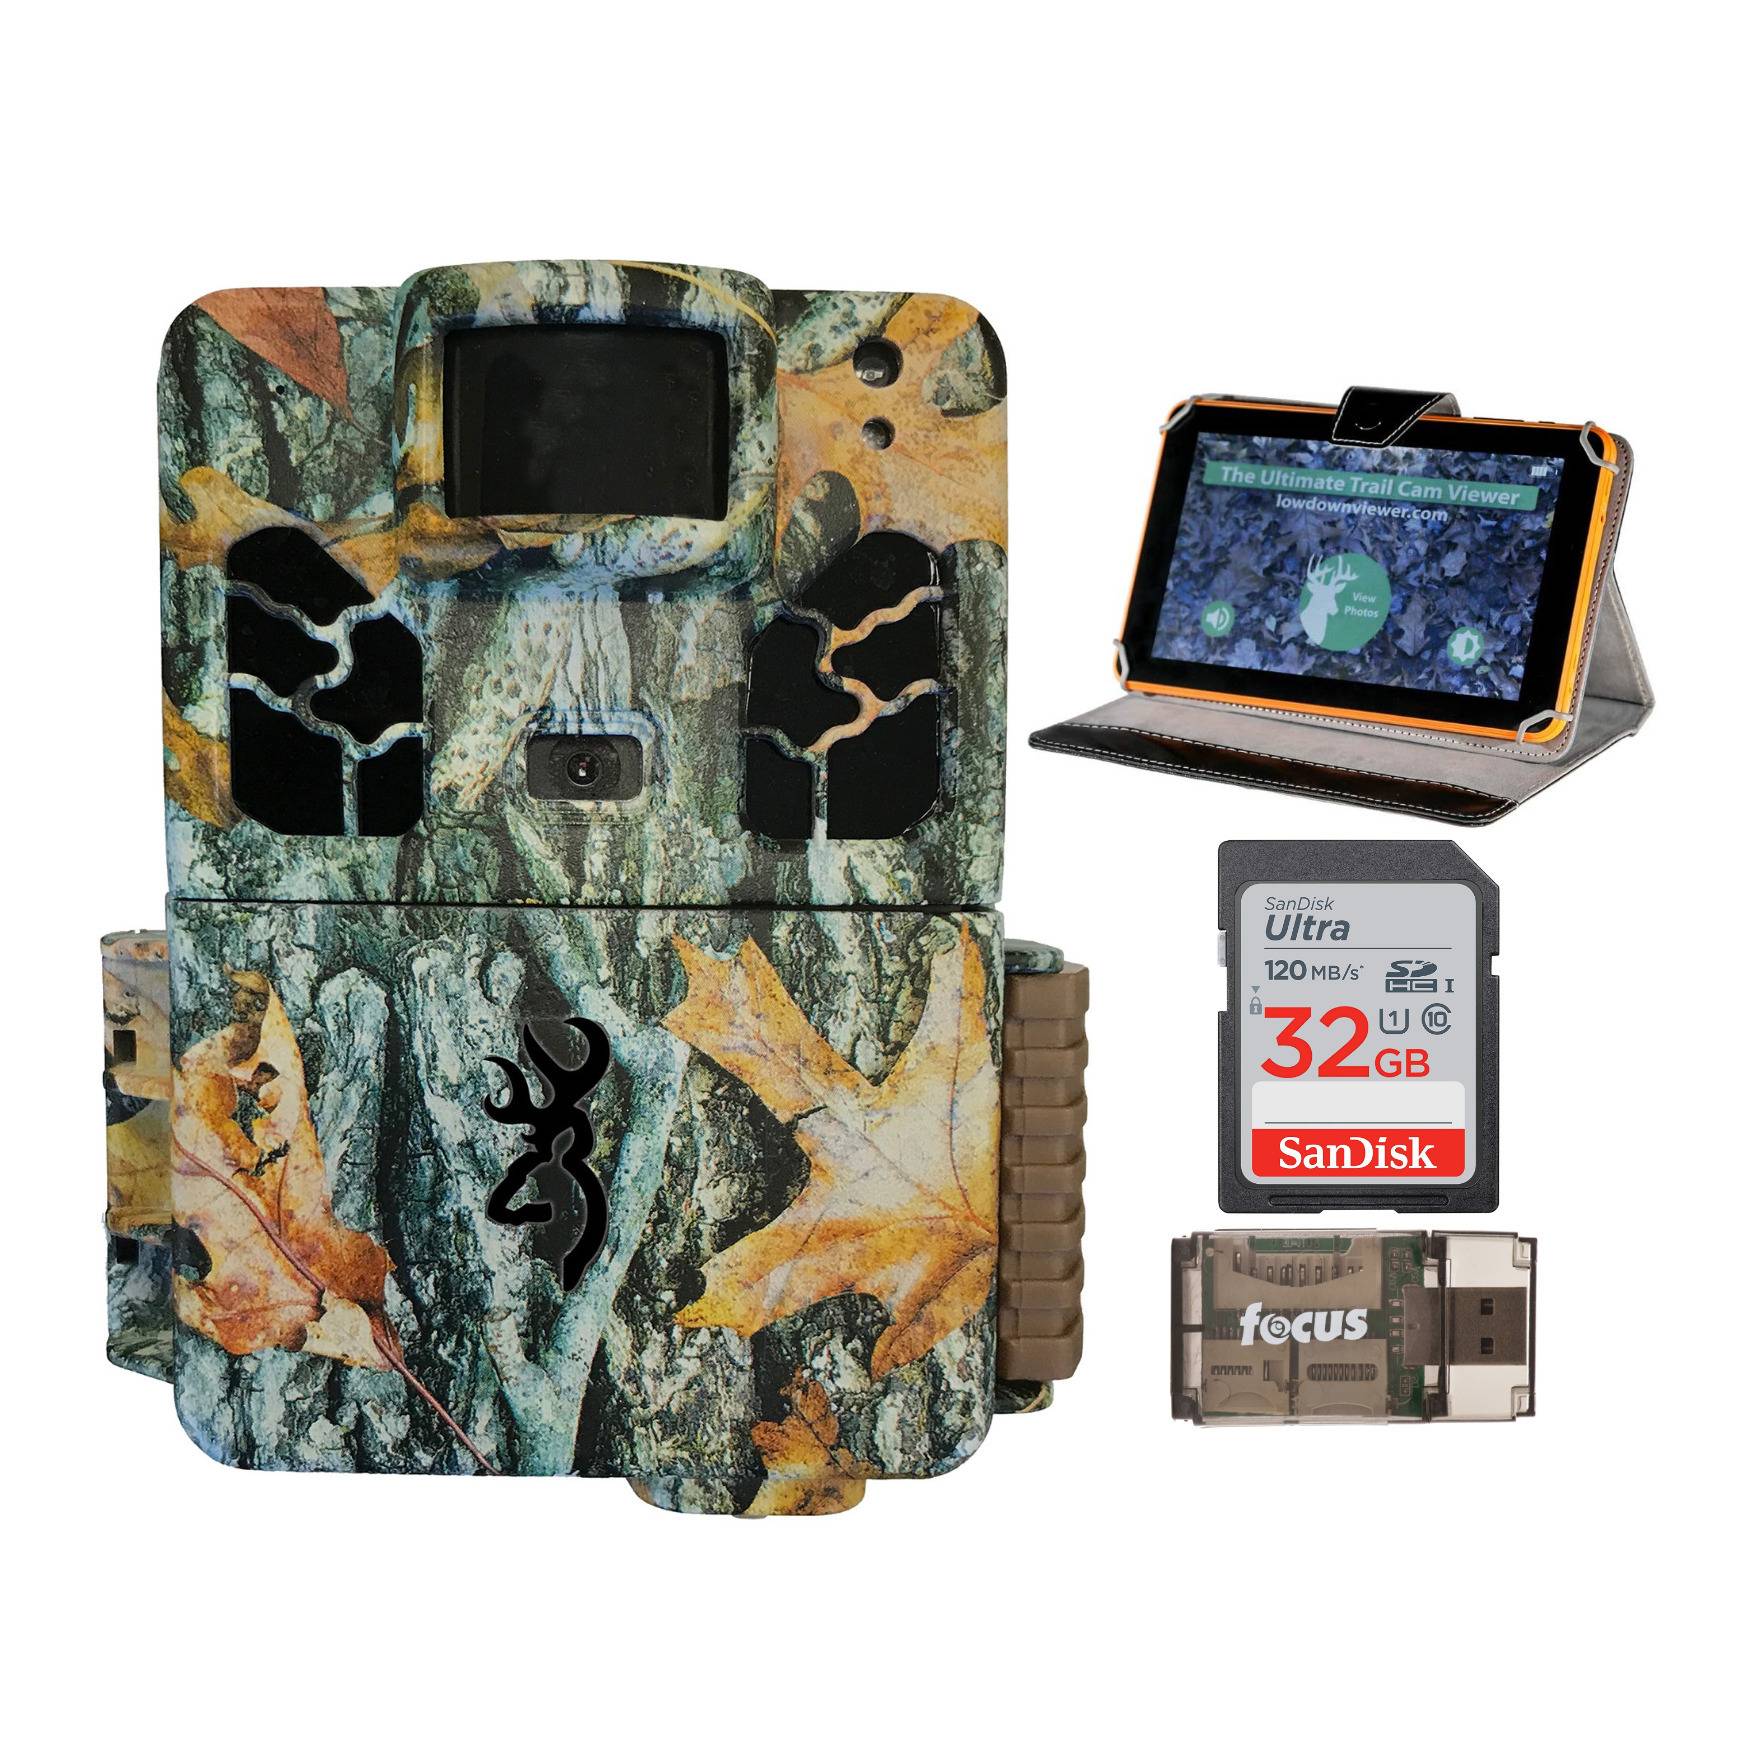 Browning Trail Cameras Dark Ops HD Pro X 20MP Trail Camera with Lowdown 2 Image and Video Viewer